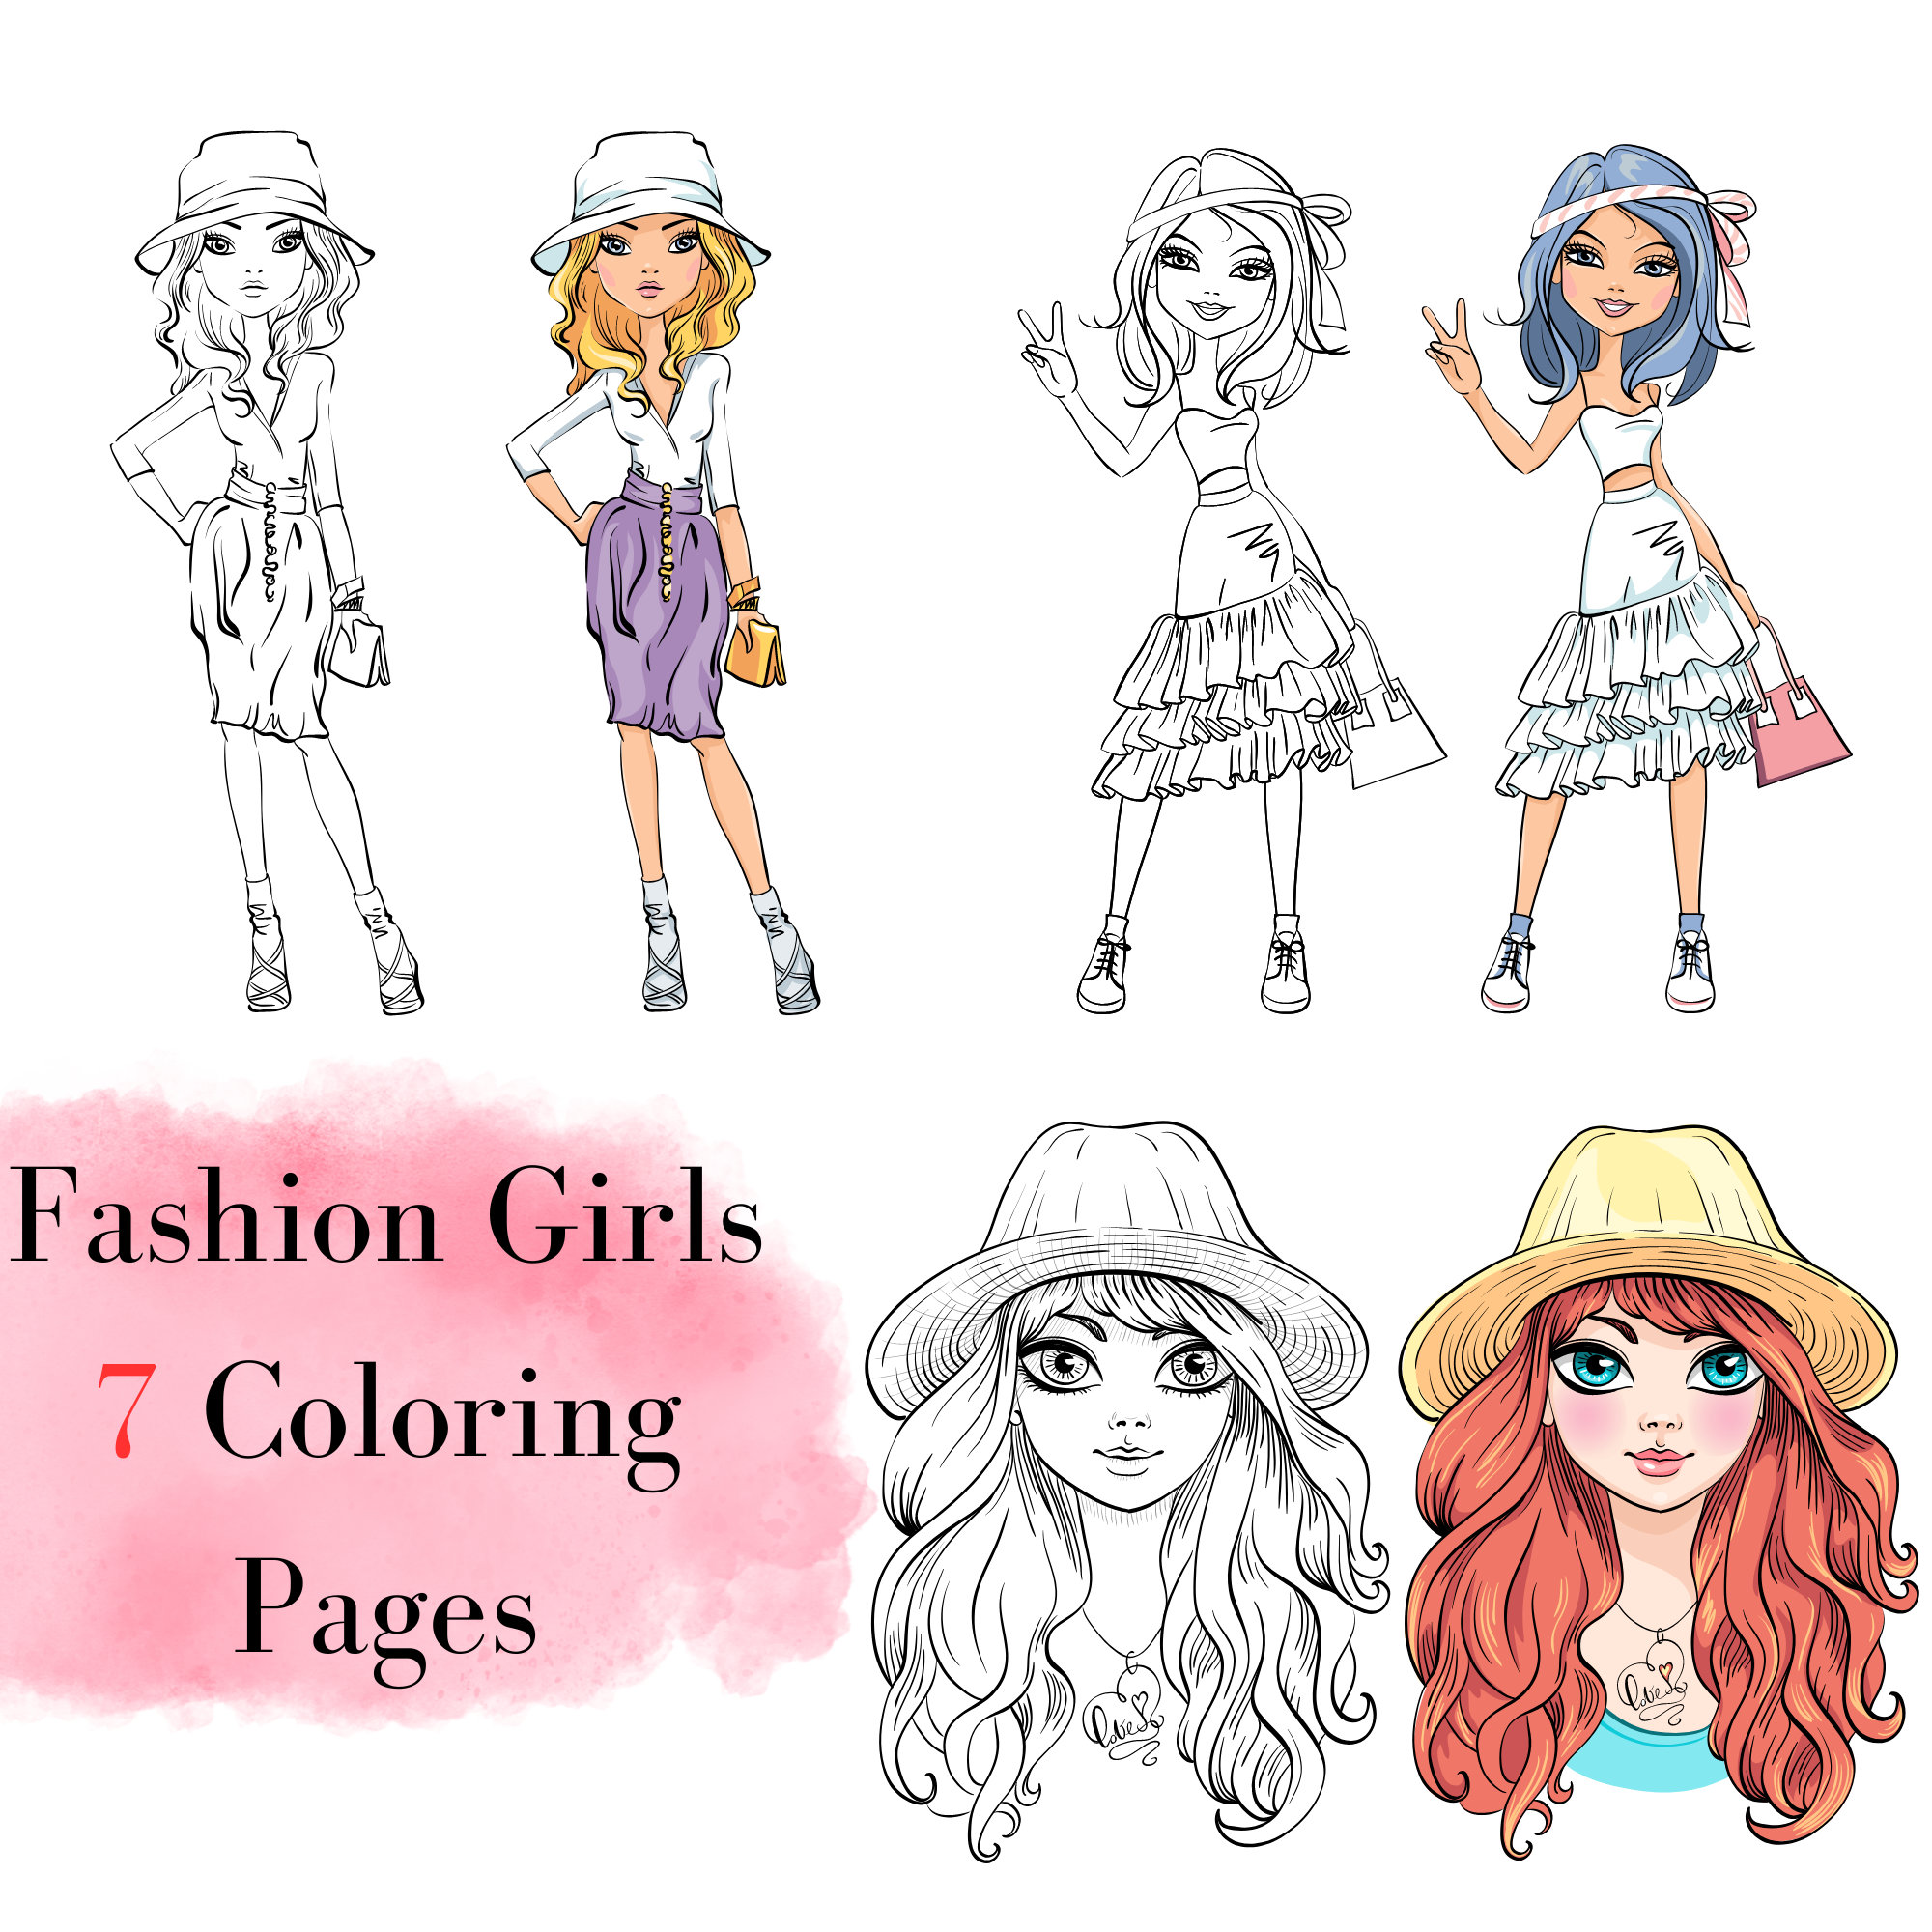 Big Sister coloring book for 3 year old: Fashion activity book for kids ages  4-8 Fashion design for girls ages 8-12 make it real Fashion coloring book a  book by Blue Whale Design